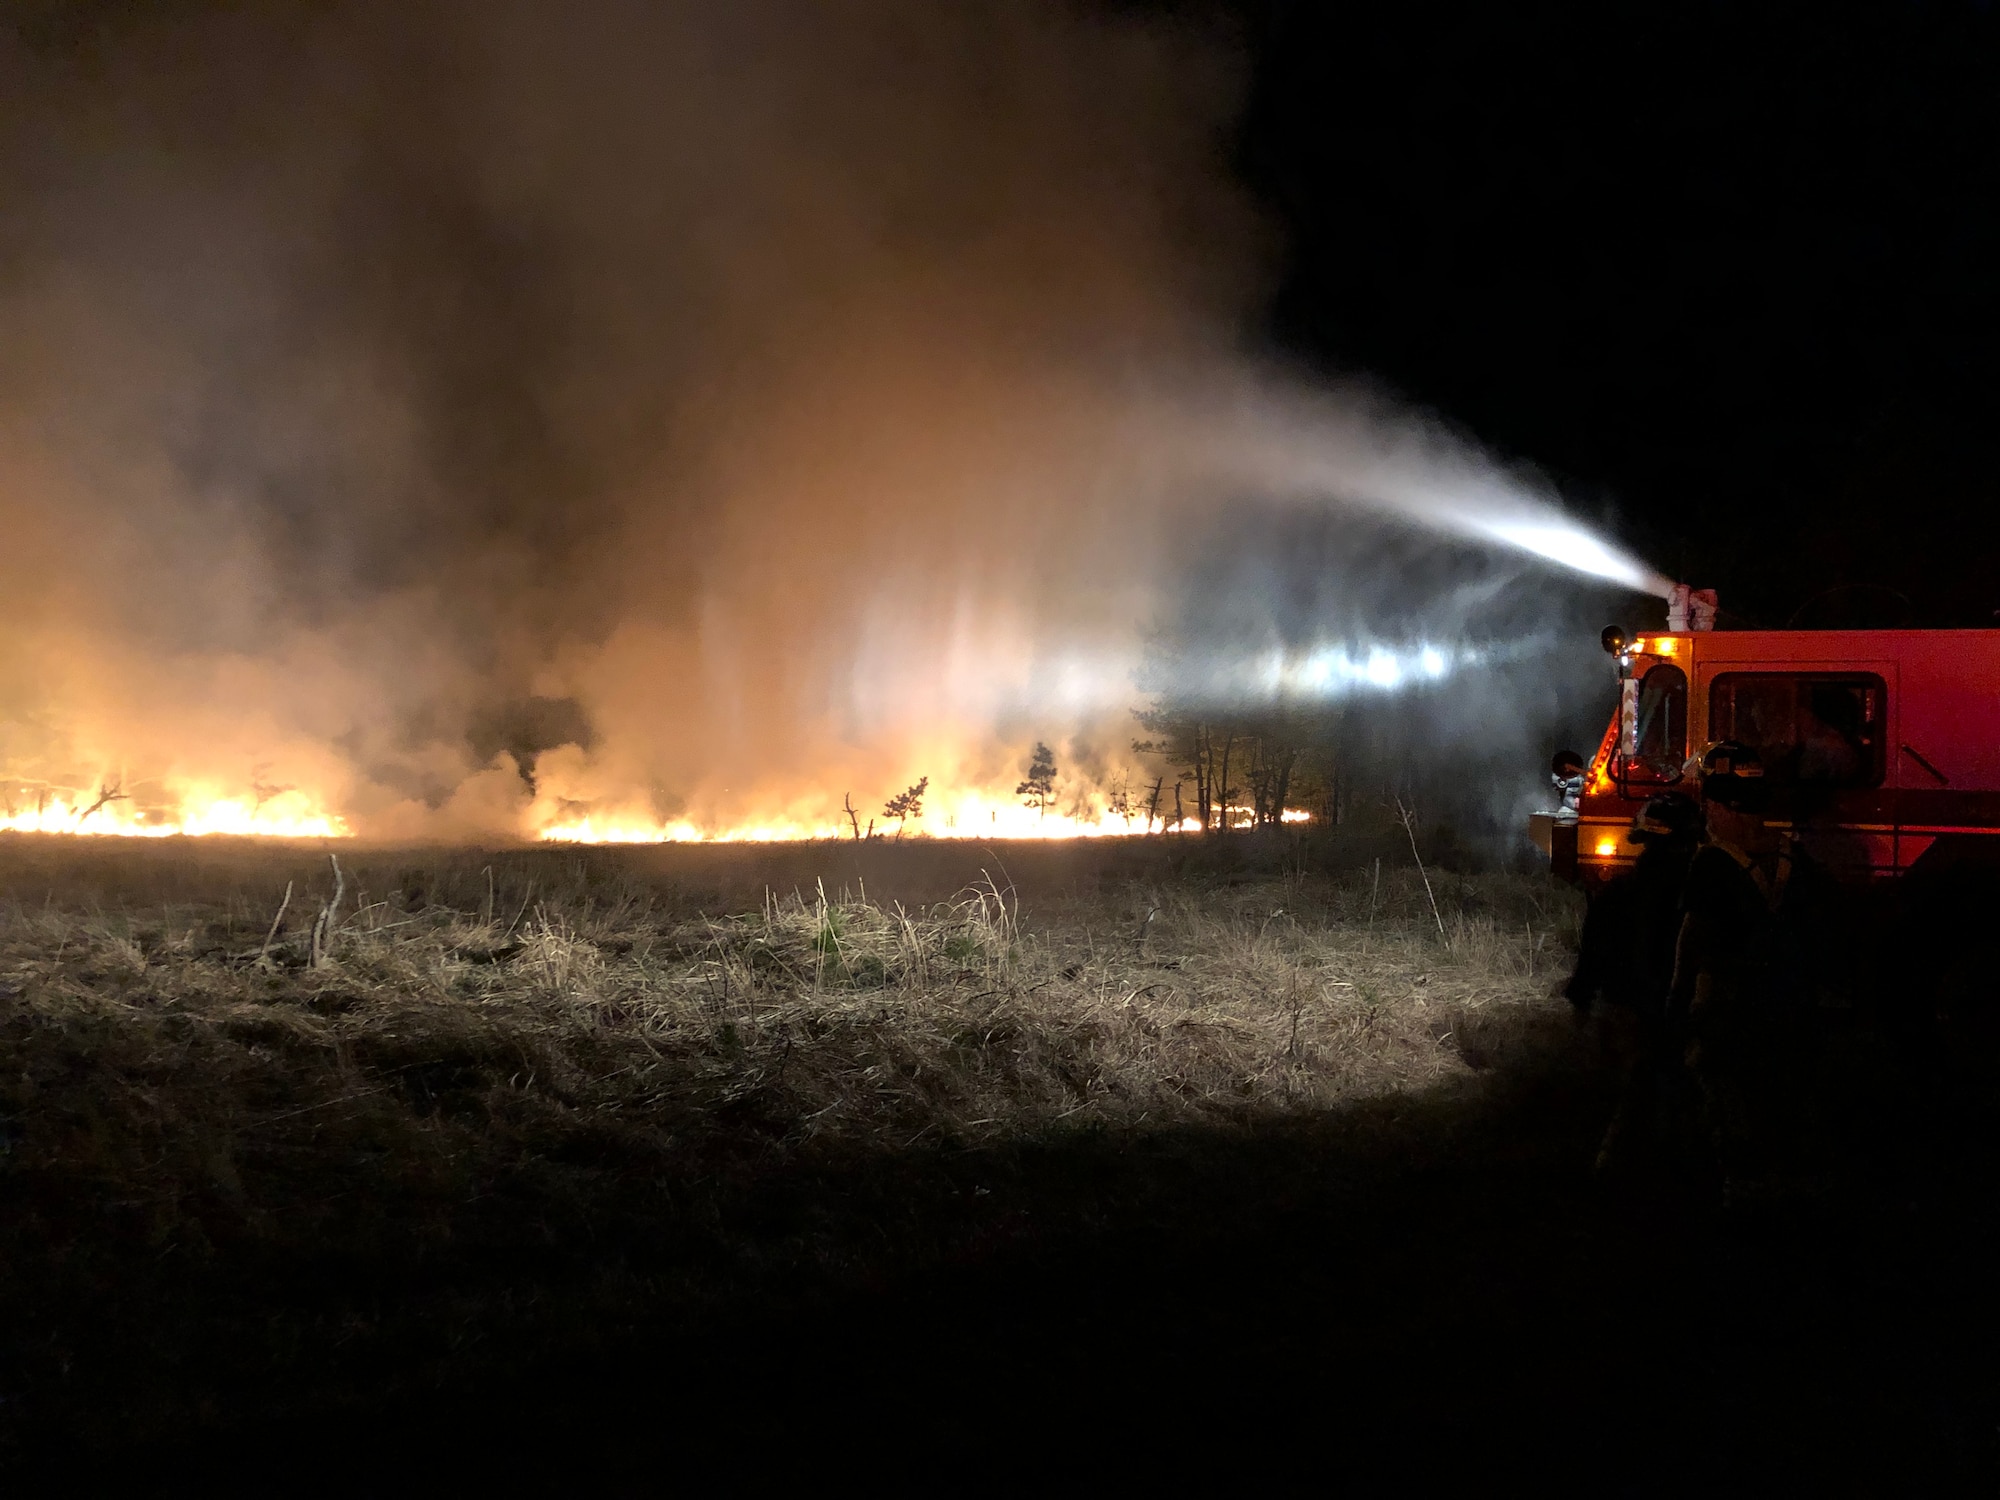 A fire truck sprays water to douse a fire in a field.